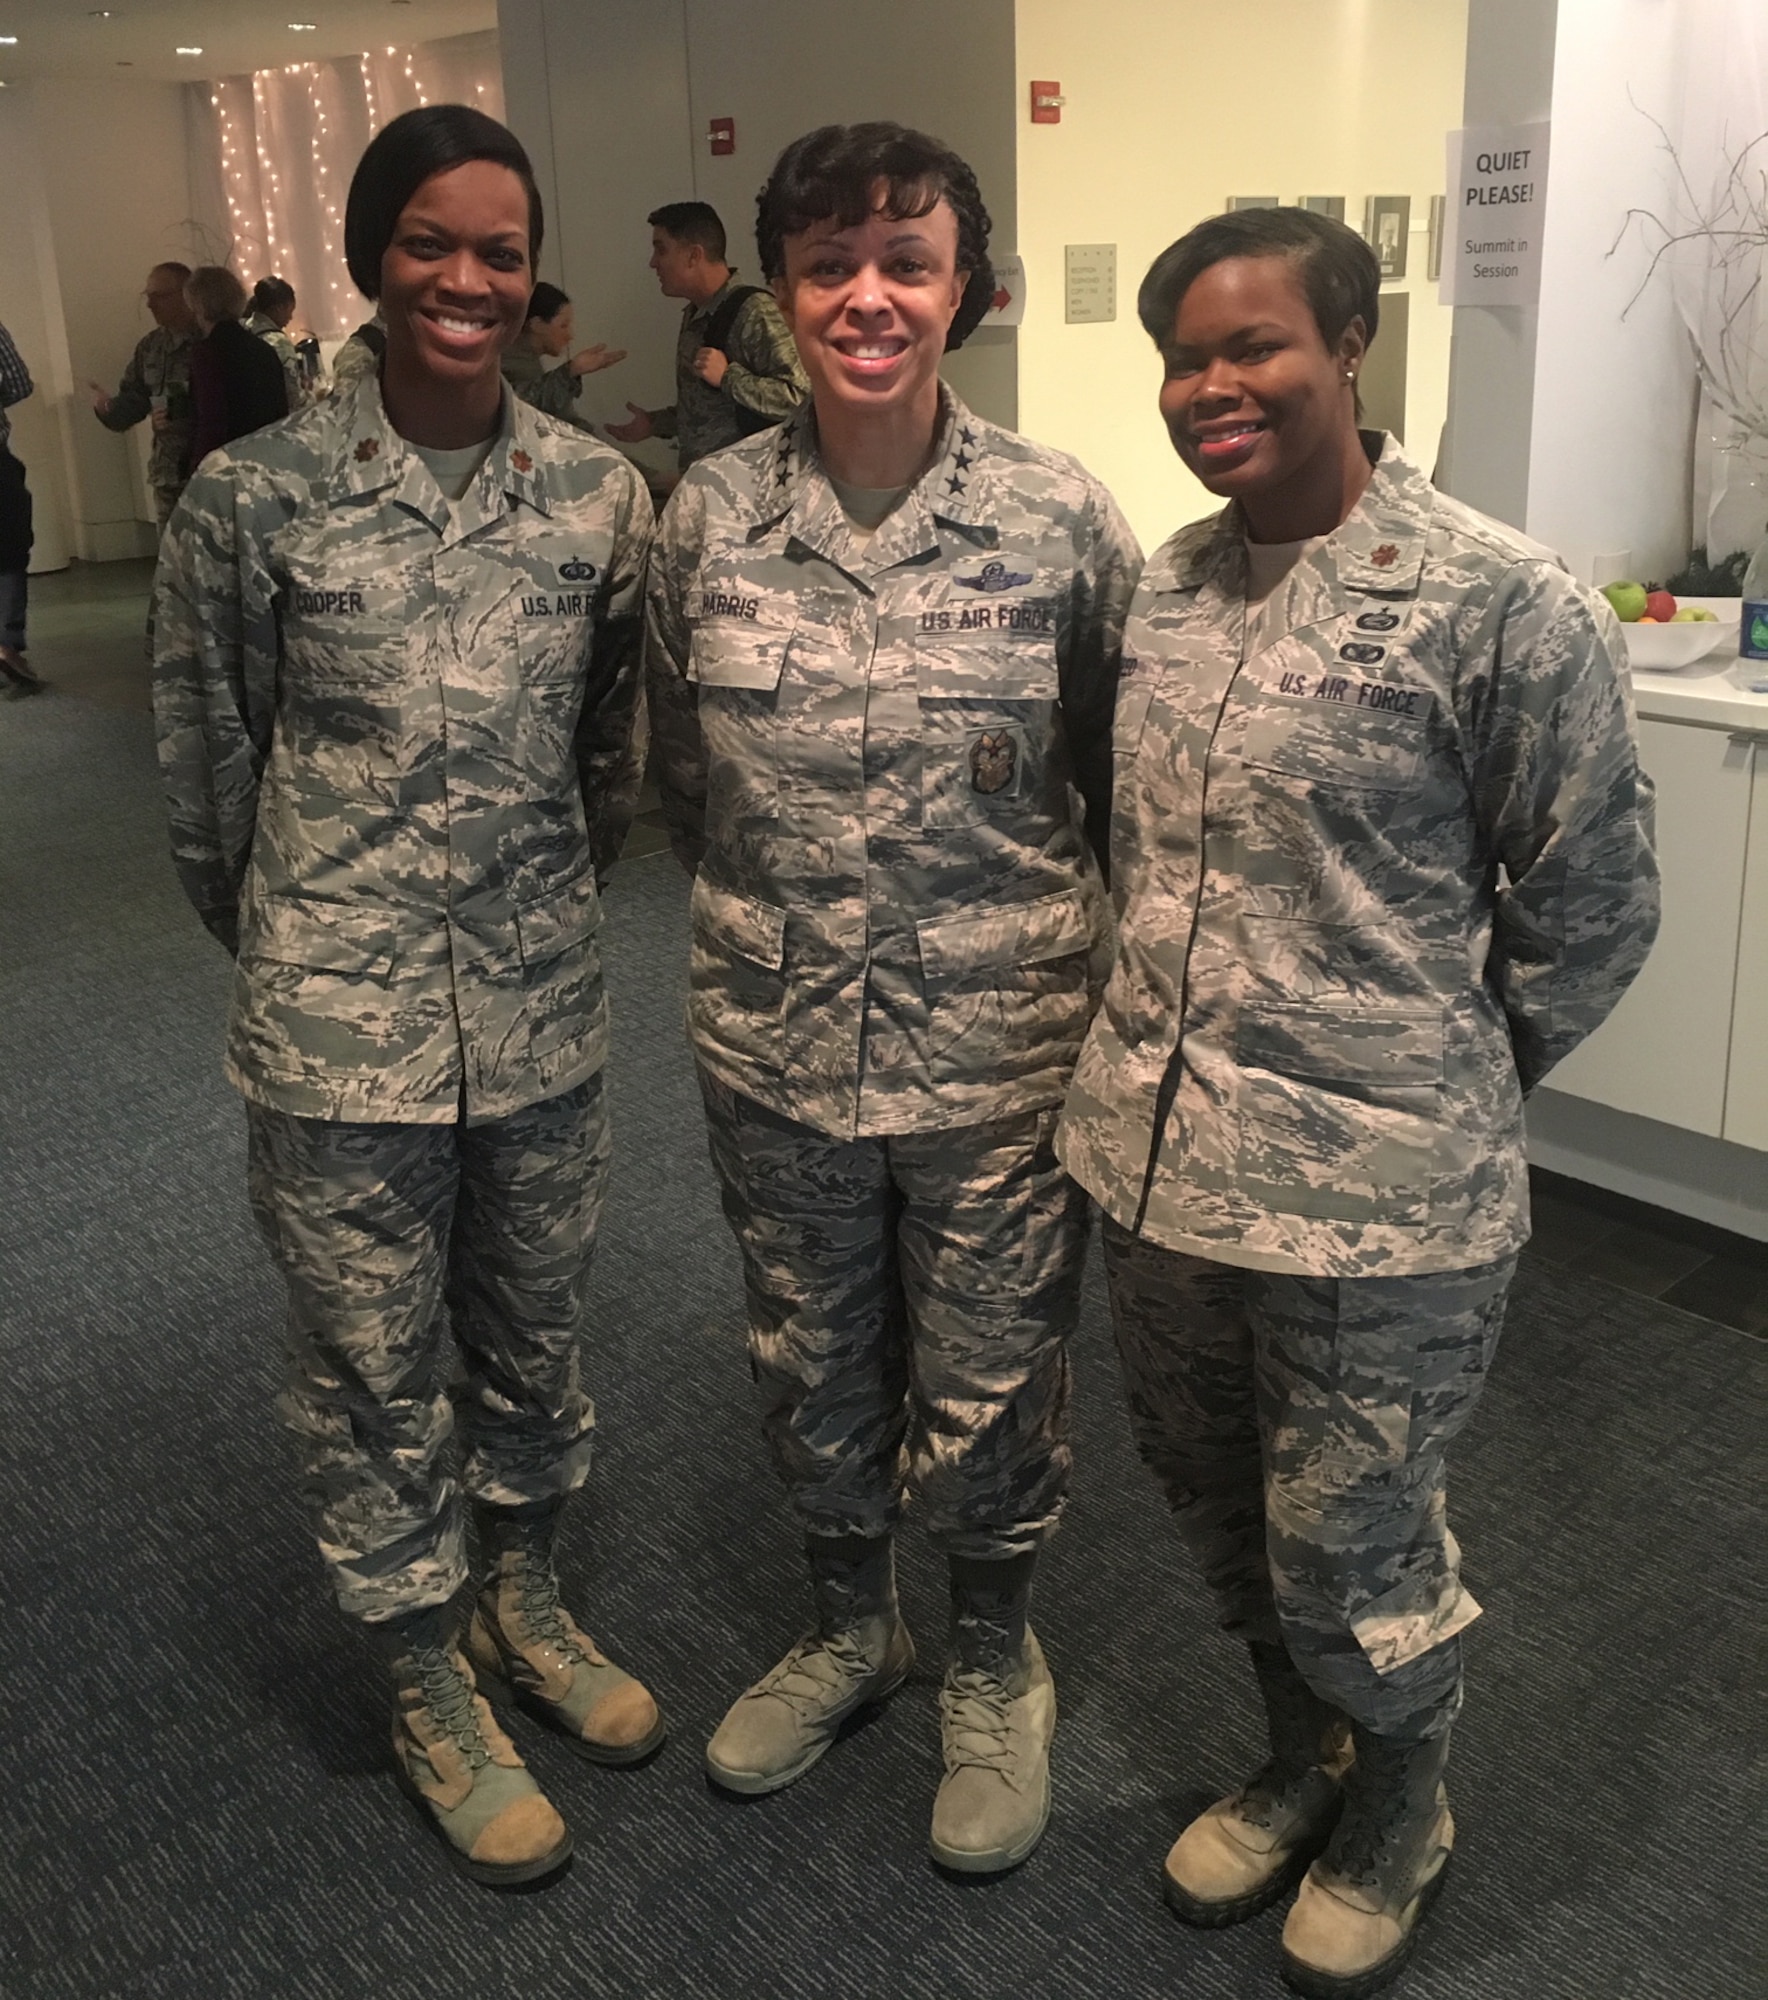 U.S. Air Force Lt. Gen. Stayce D. Harris, Inspector General of the Air Force, center, poses for a photo with Maj. Natosha Reed, U.S. Air Forces in Europe and Air Forces Africa International Affairs Operations deputy branch chief, right, and Maj. Kira Cooper, Air Force Reserve Command force development chief, left, at the Military and Civilian Workforce Summit in Washington, D.C., Dec. 12, 2017.